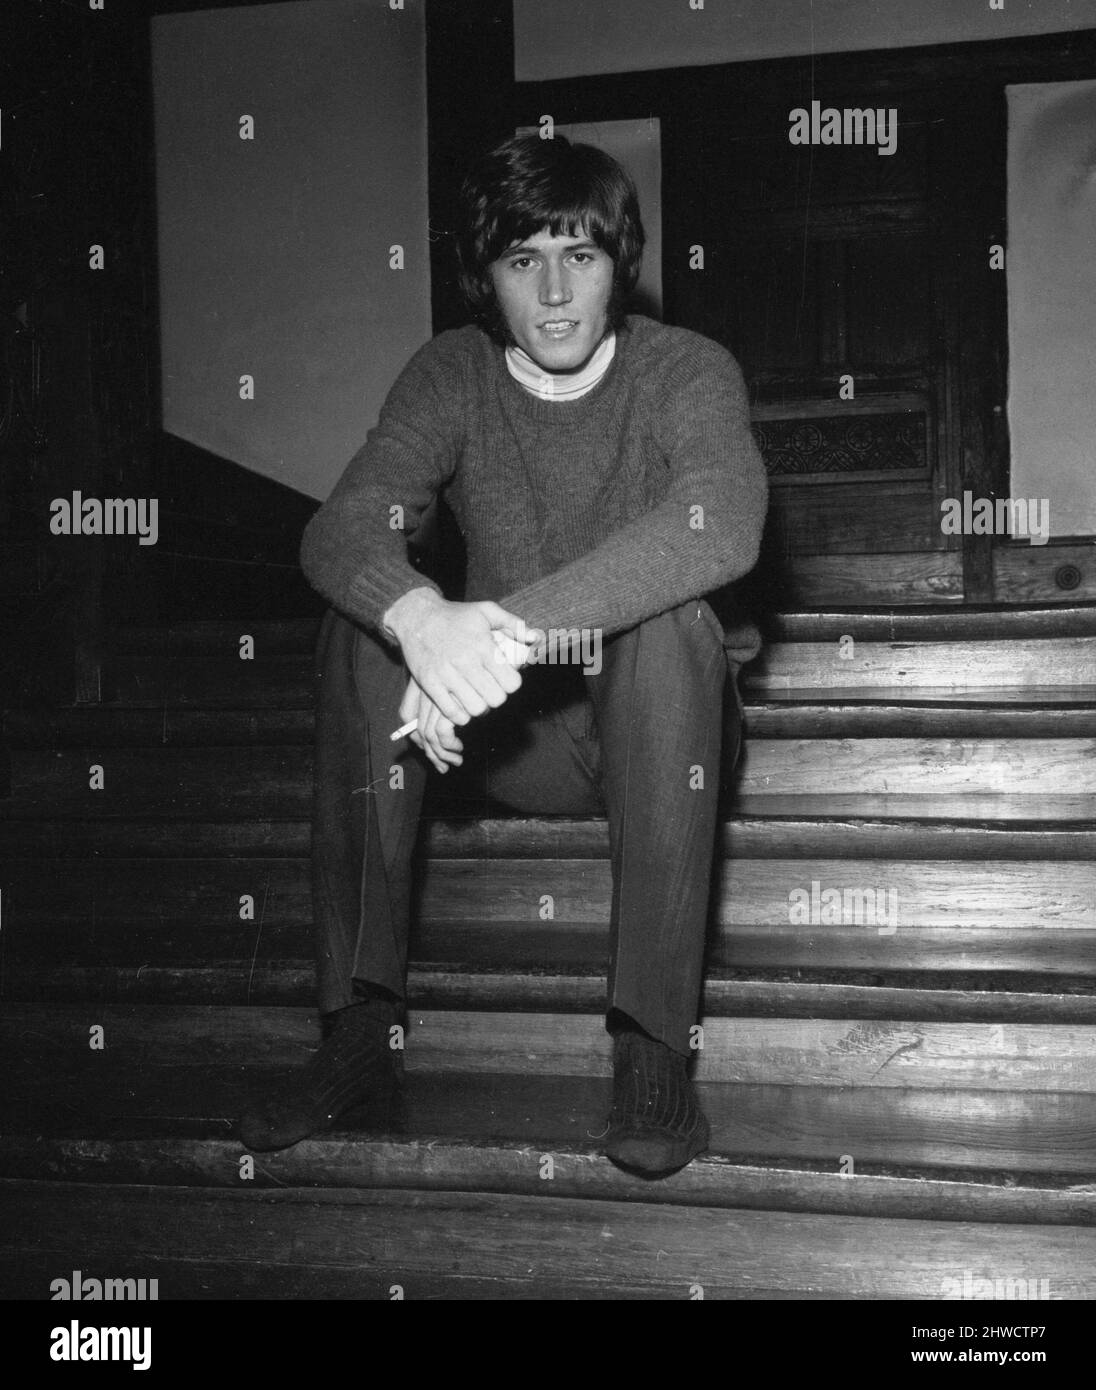 Barry Gibb of the Bee Gees pop group pictured at the home  of the group's manager Robert Stigwood in Stanmore, London February 1969 Stock Photo